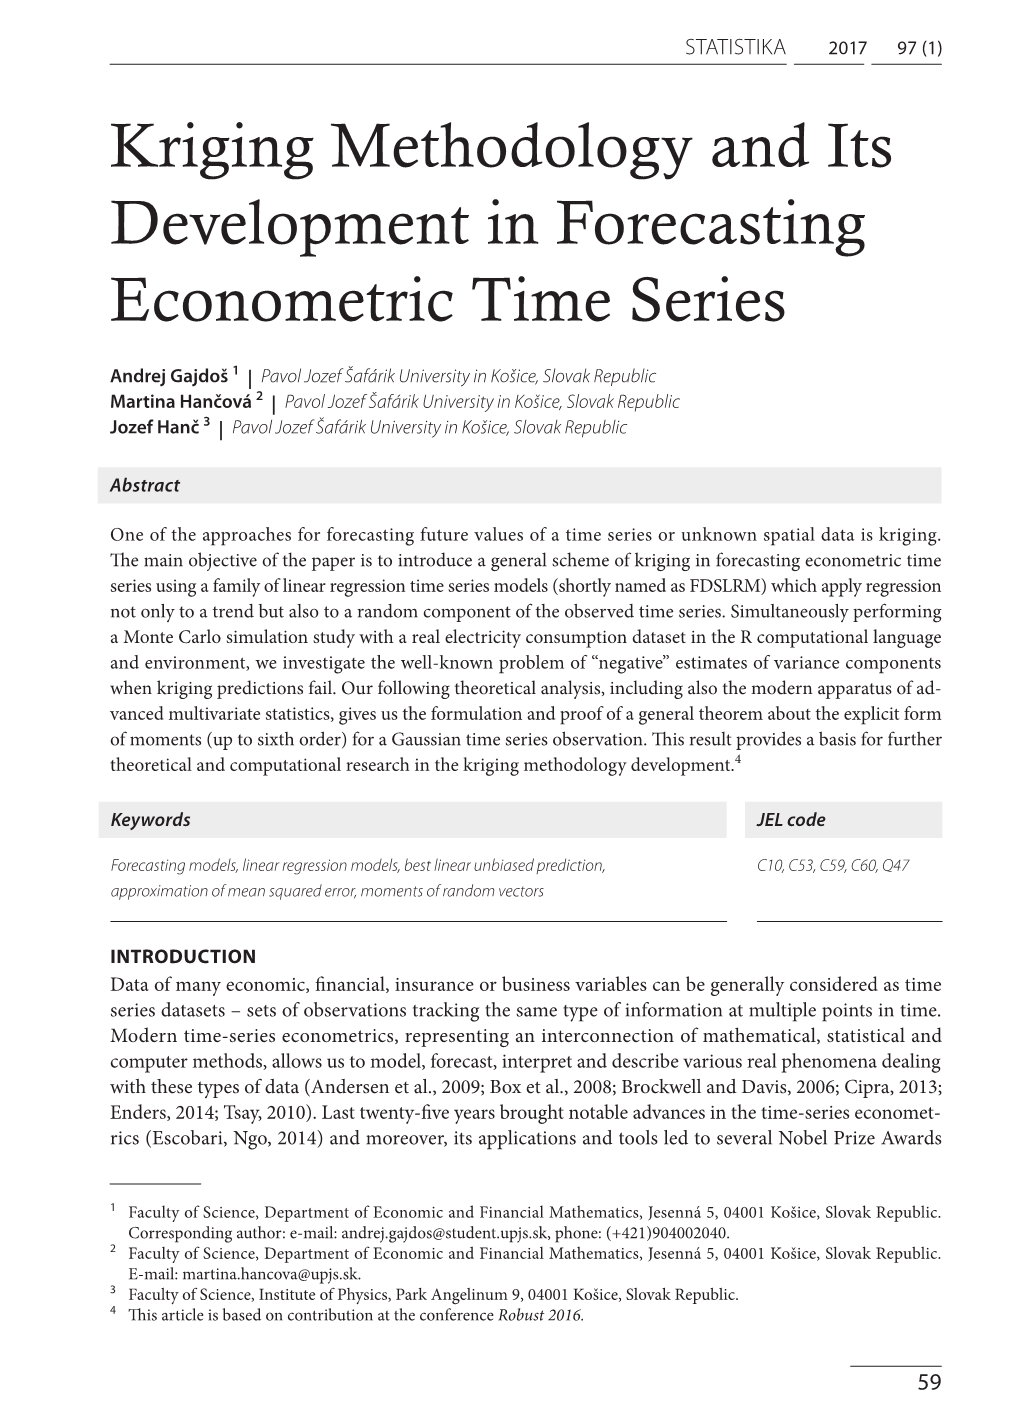 Kriging Methodology and Its Development in Forecasting Econometric Time Series